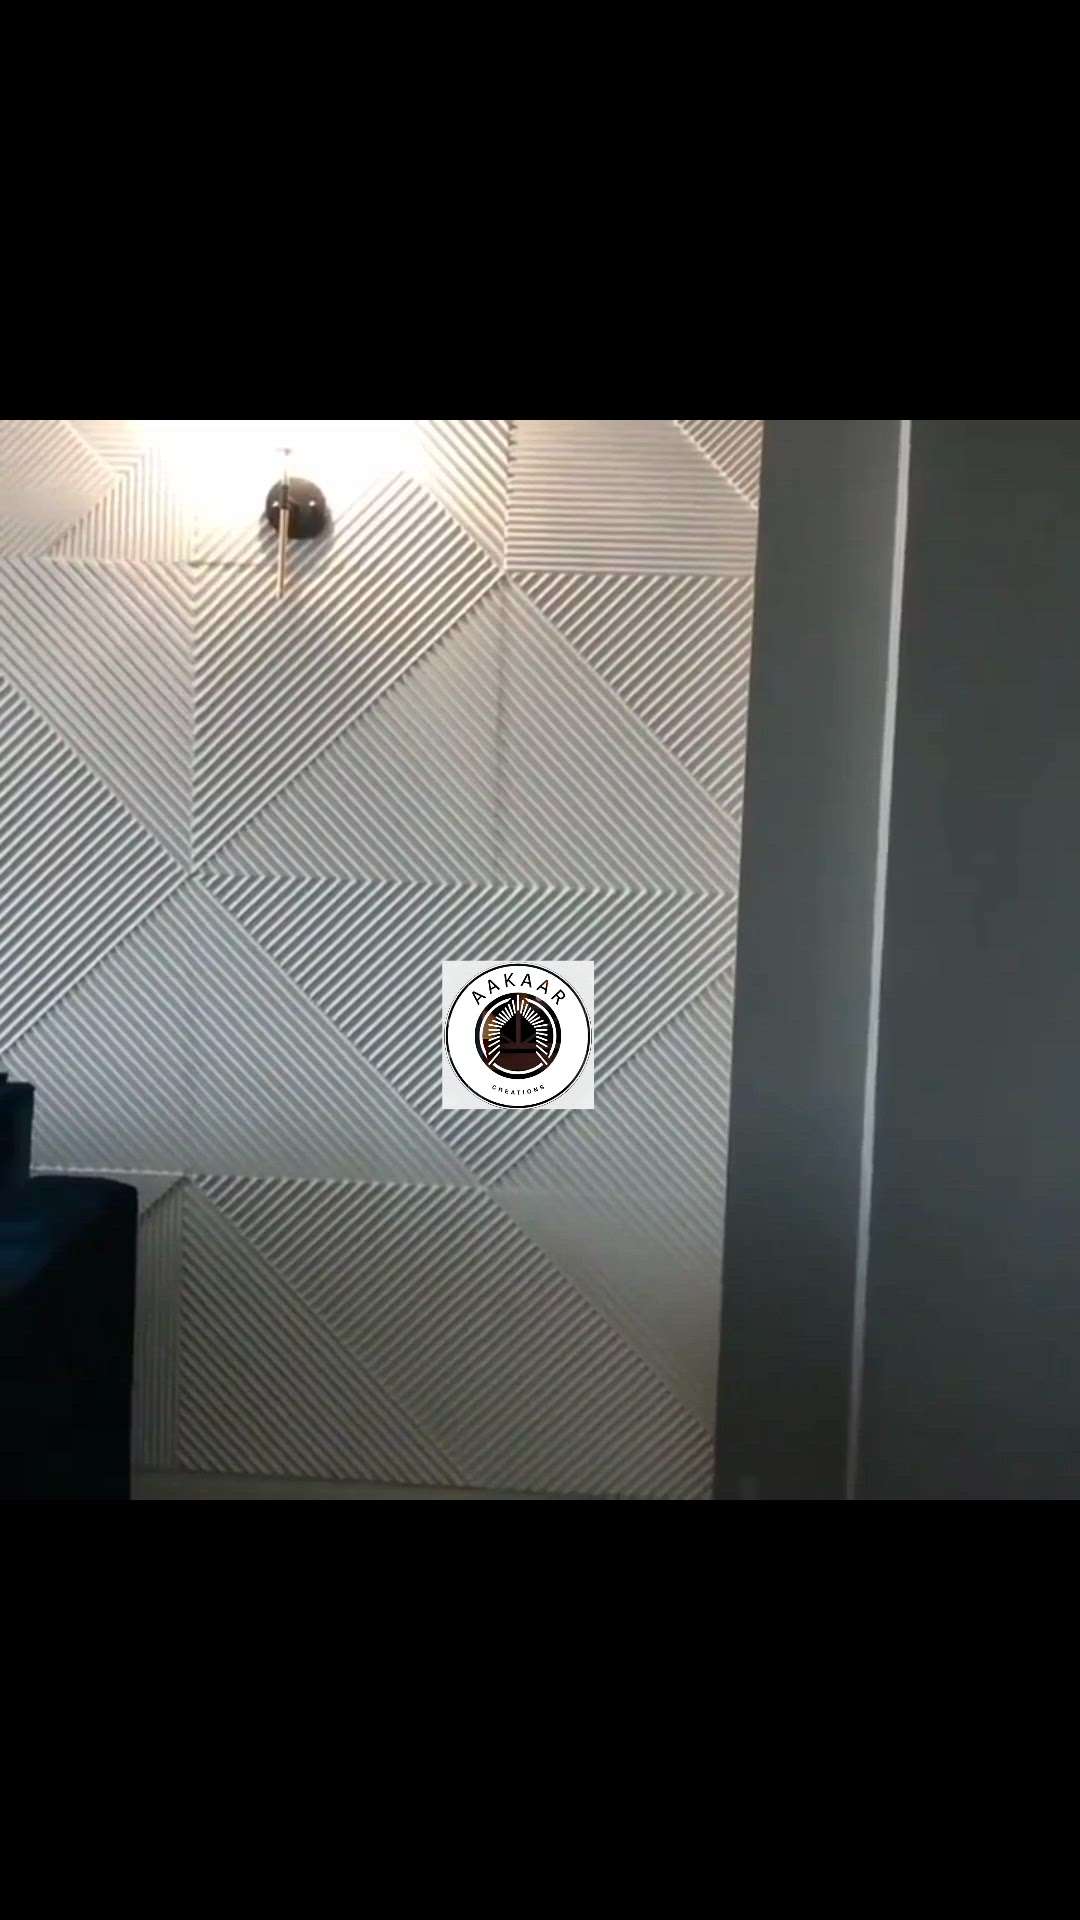 #3dgrgwallcladdings #3dwall  #3dwalldesign  #WallDecors  #WALL_PANELLING  #customized_wall  #GypsumCeiling  #WallDesigns  #interiors  #luxuryinteriors  #grg  #wallcladding  #Mordern #wallpanels #designdeinteriores #designinspiration #indianarchitecture #indiandesigncommunity #mordernarchitecture #bhopalarchitecture #bhopalarchitect#all